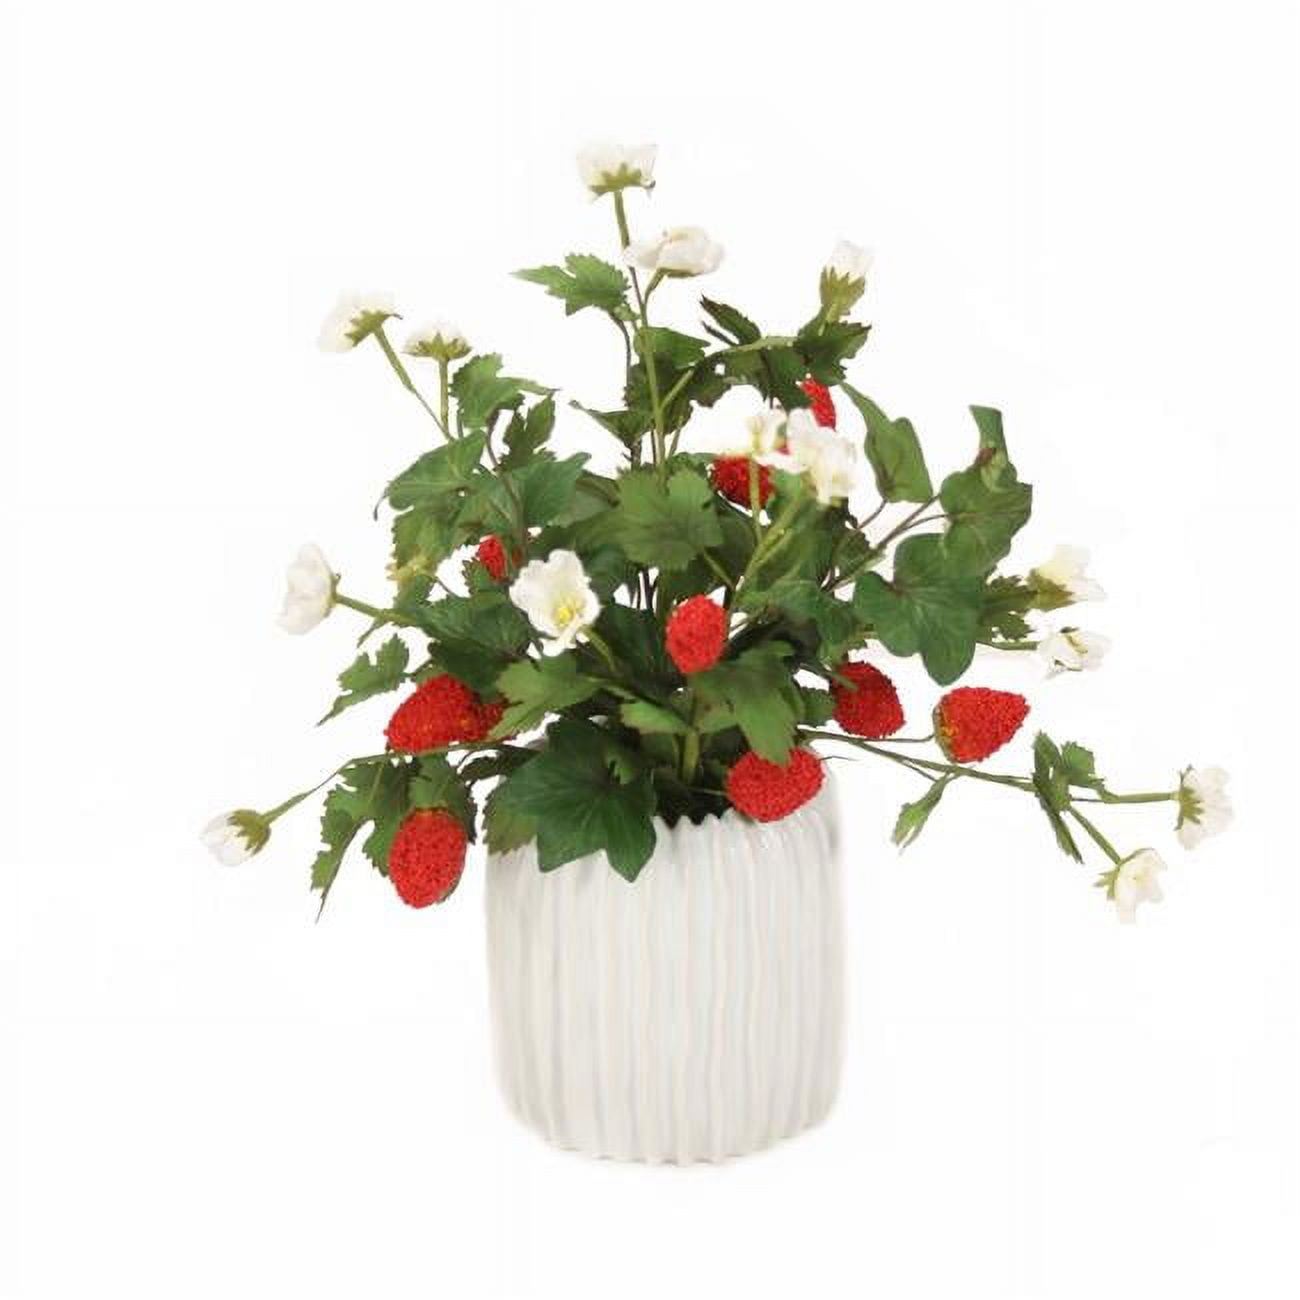 Picture of Disttive Designs 5101A Unisex Strawberries & Hedera Ivy in White Ribbed Planter - Red